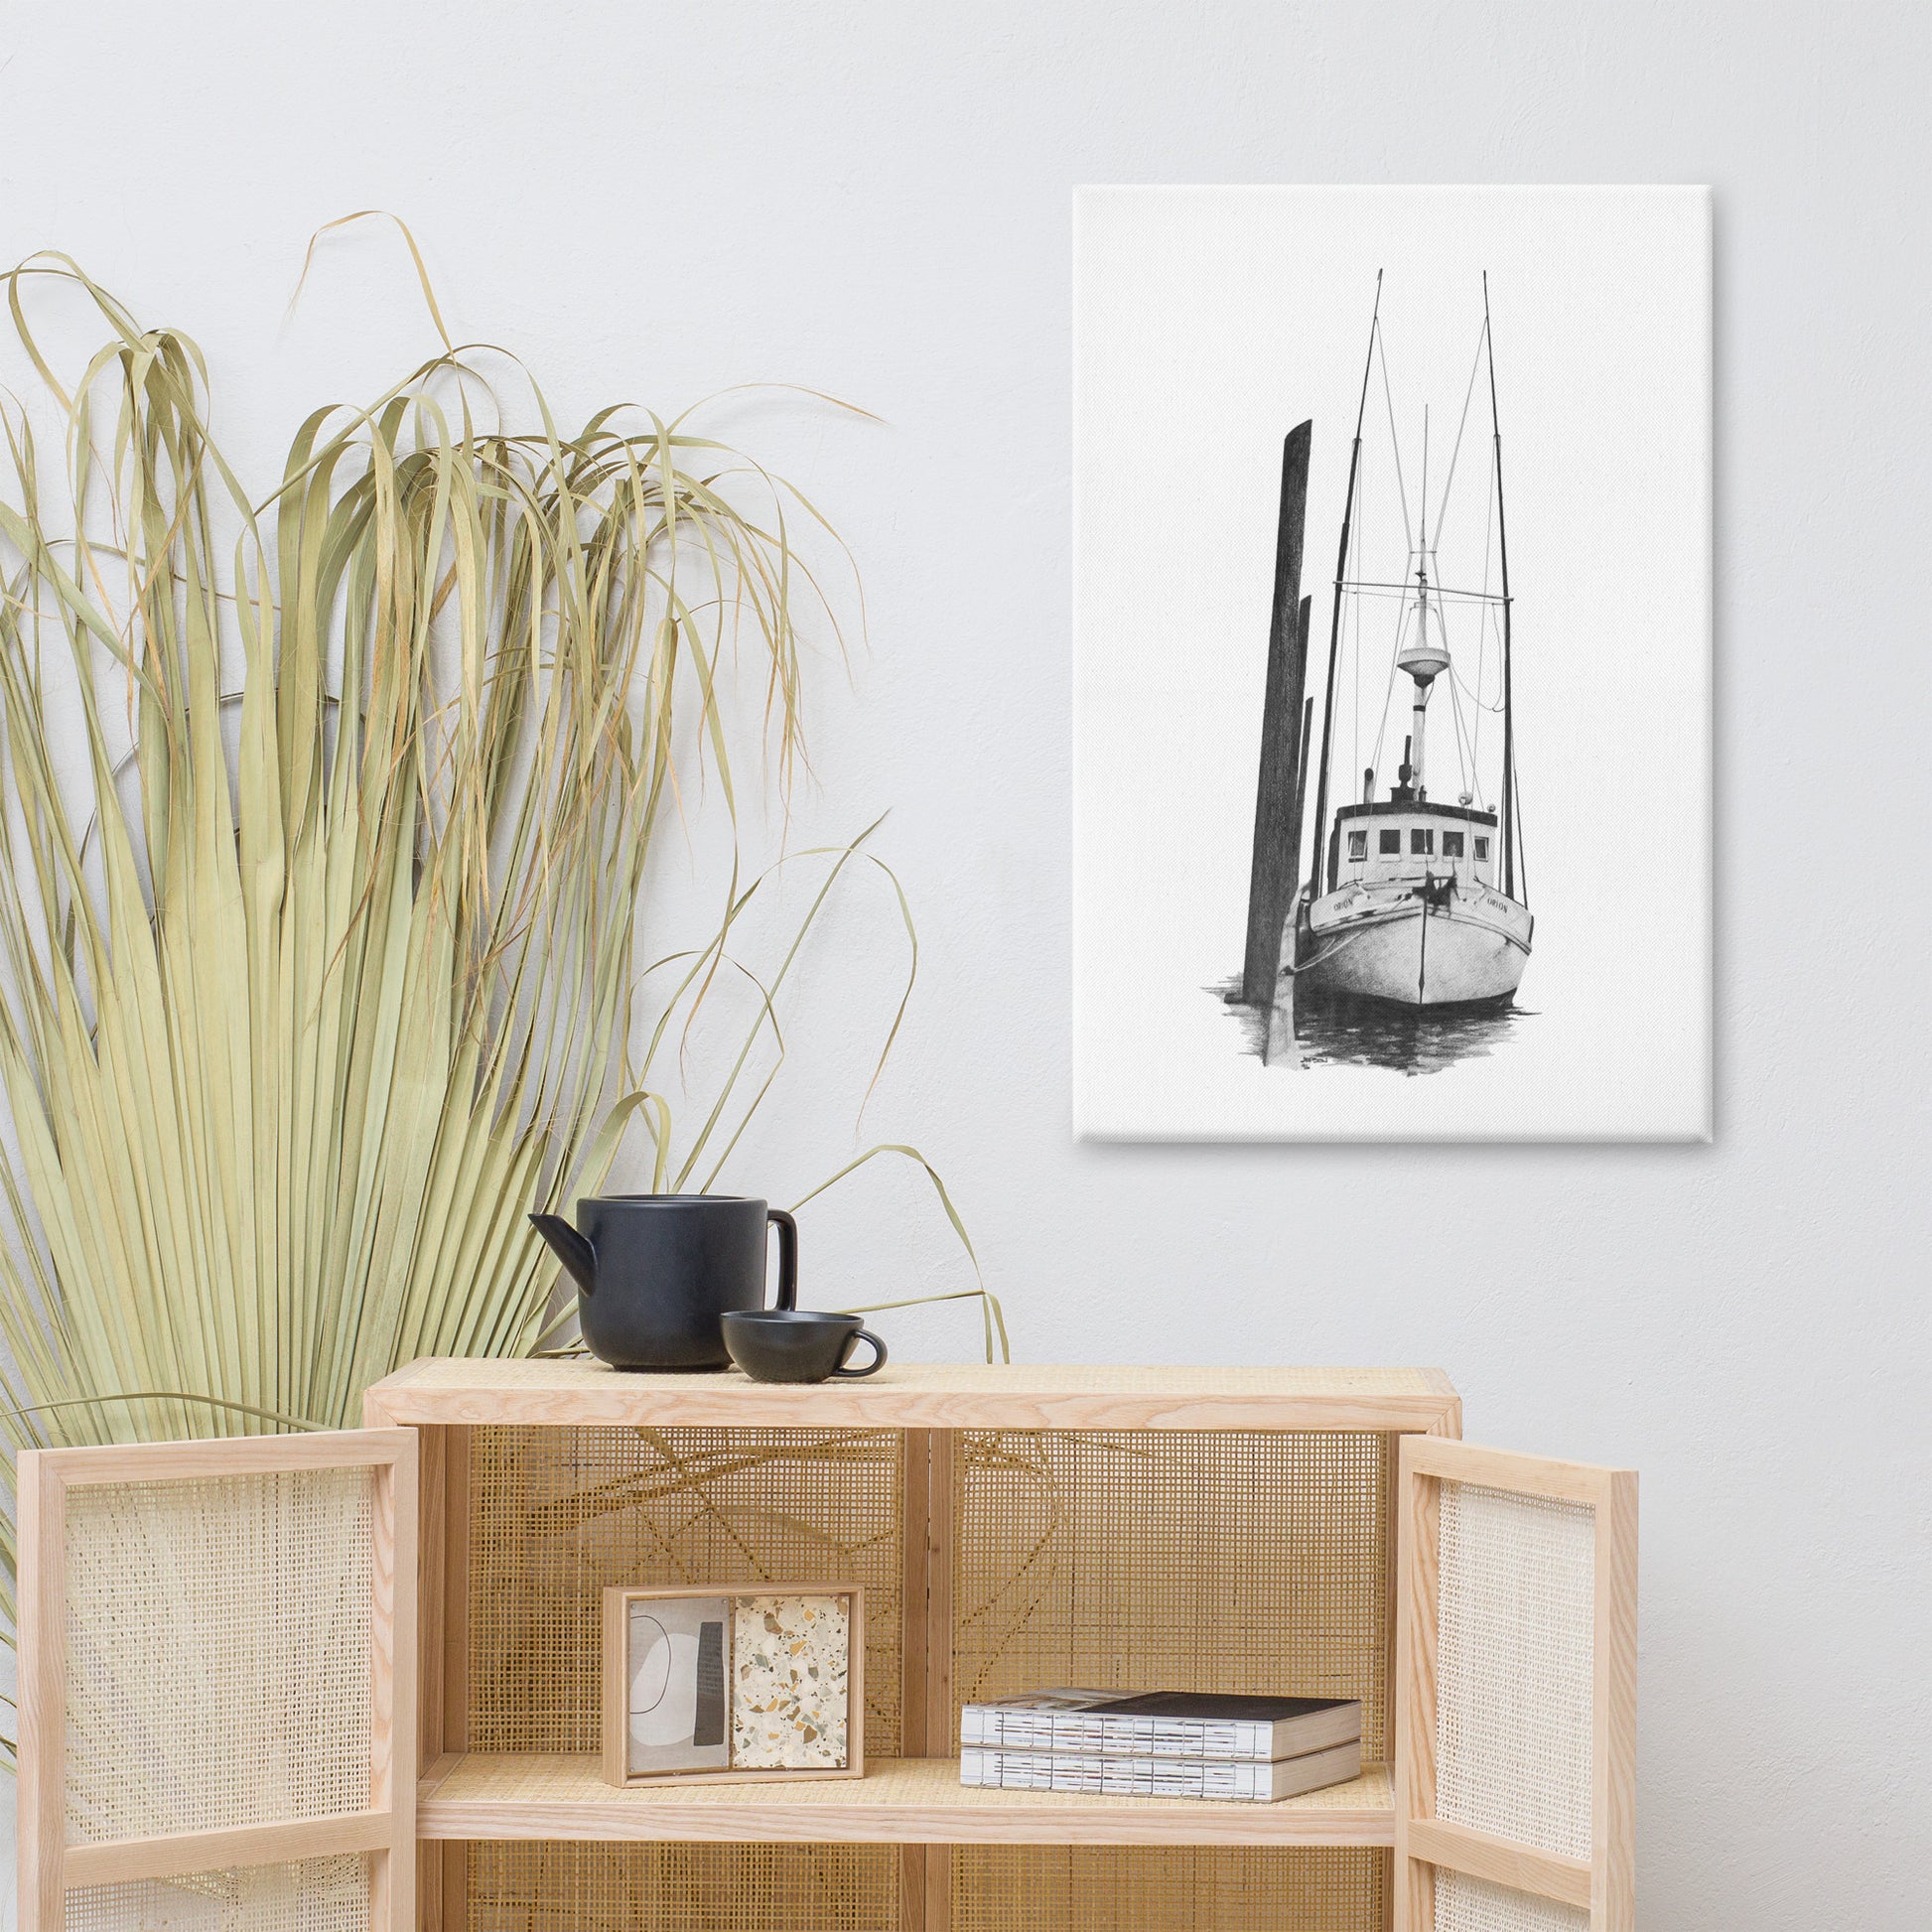 These "Fishing Boat Canvas Wall Hangings" are from a drawing of mine created with a graphite pencil. It has been digitally optimized and transferred to a poly-cotton blend canvas.